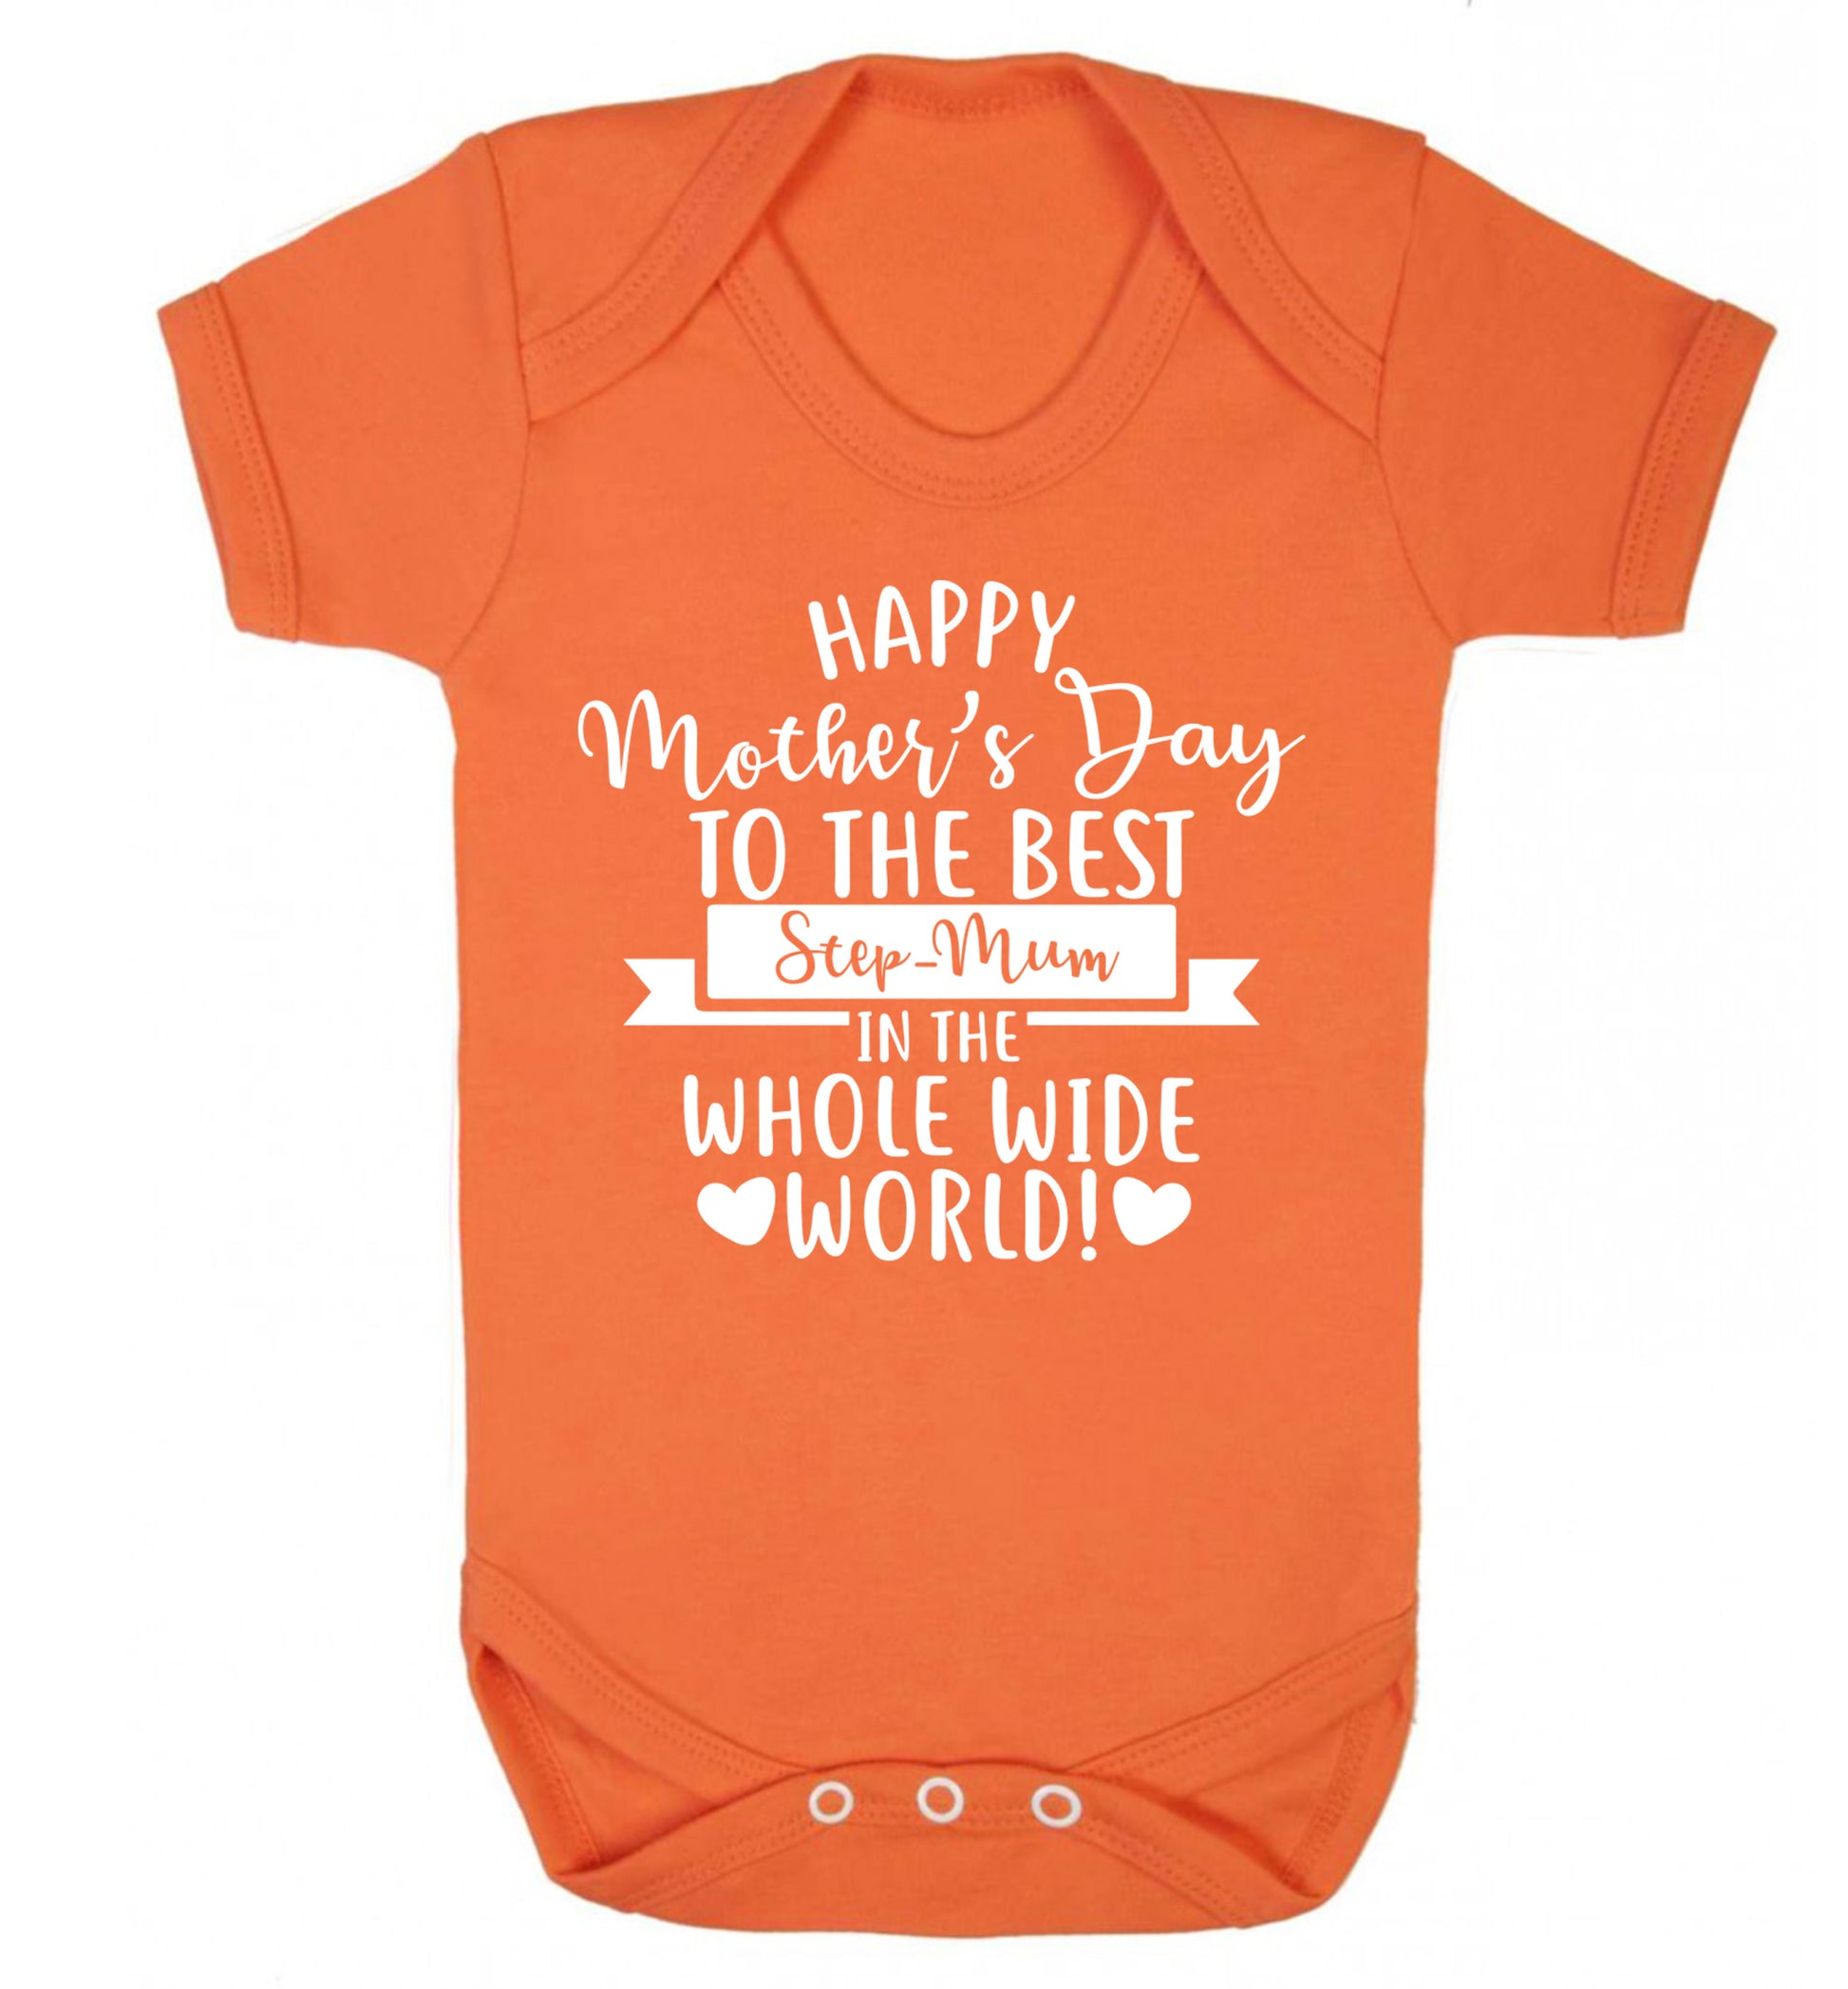 Happy mother's day to the best step-mum in the world Baby Vest orange 18-24 months